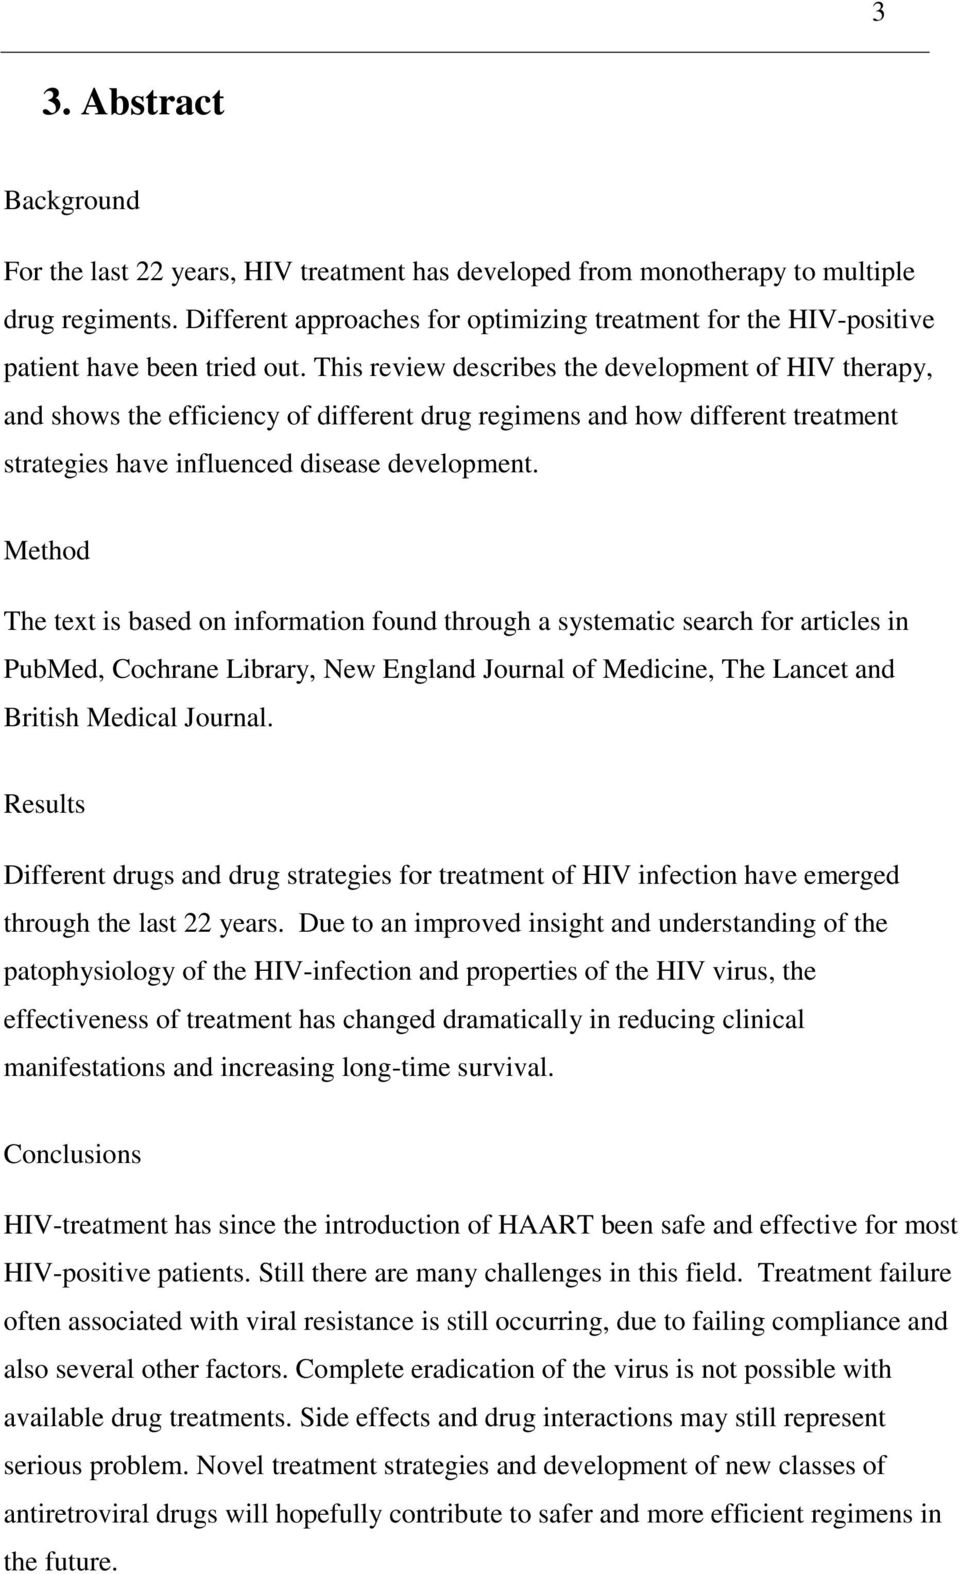 This review describes the development of HIV therapy, and shows the efficiency of different drug regimens and how different treatment strategies have influenced disease development.